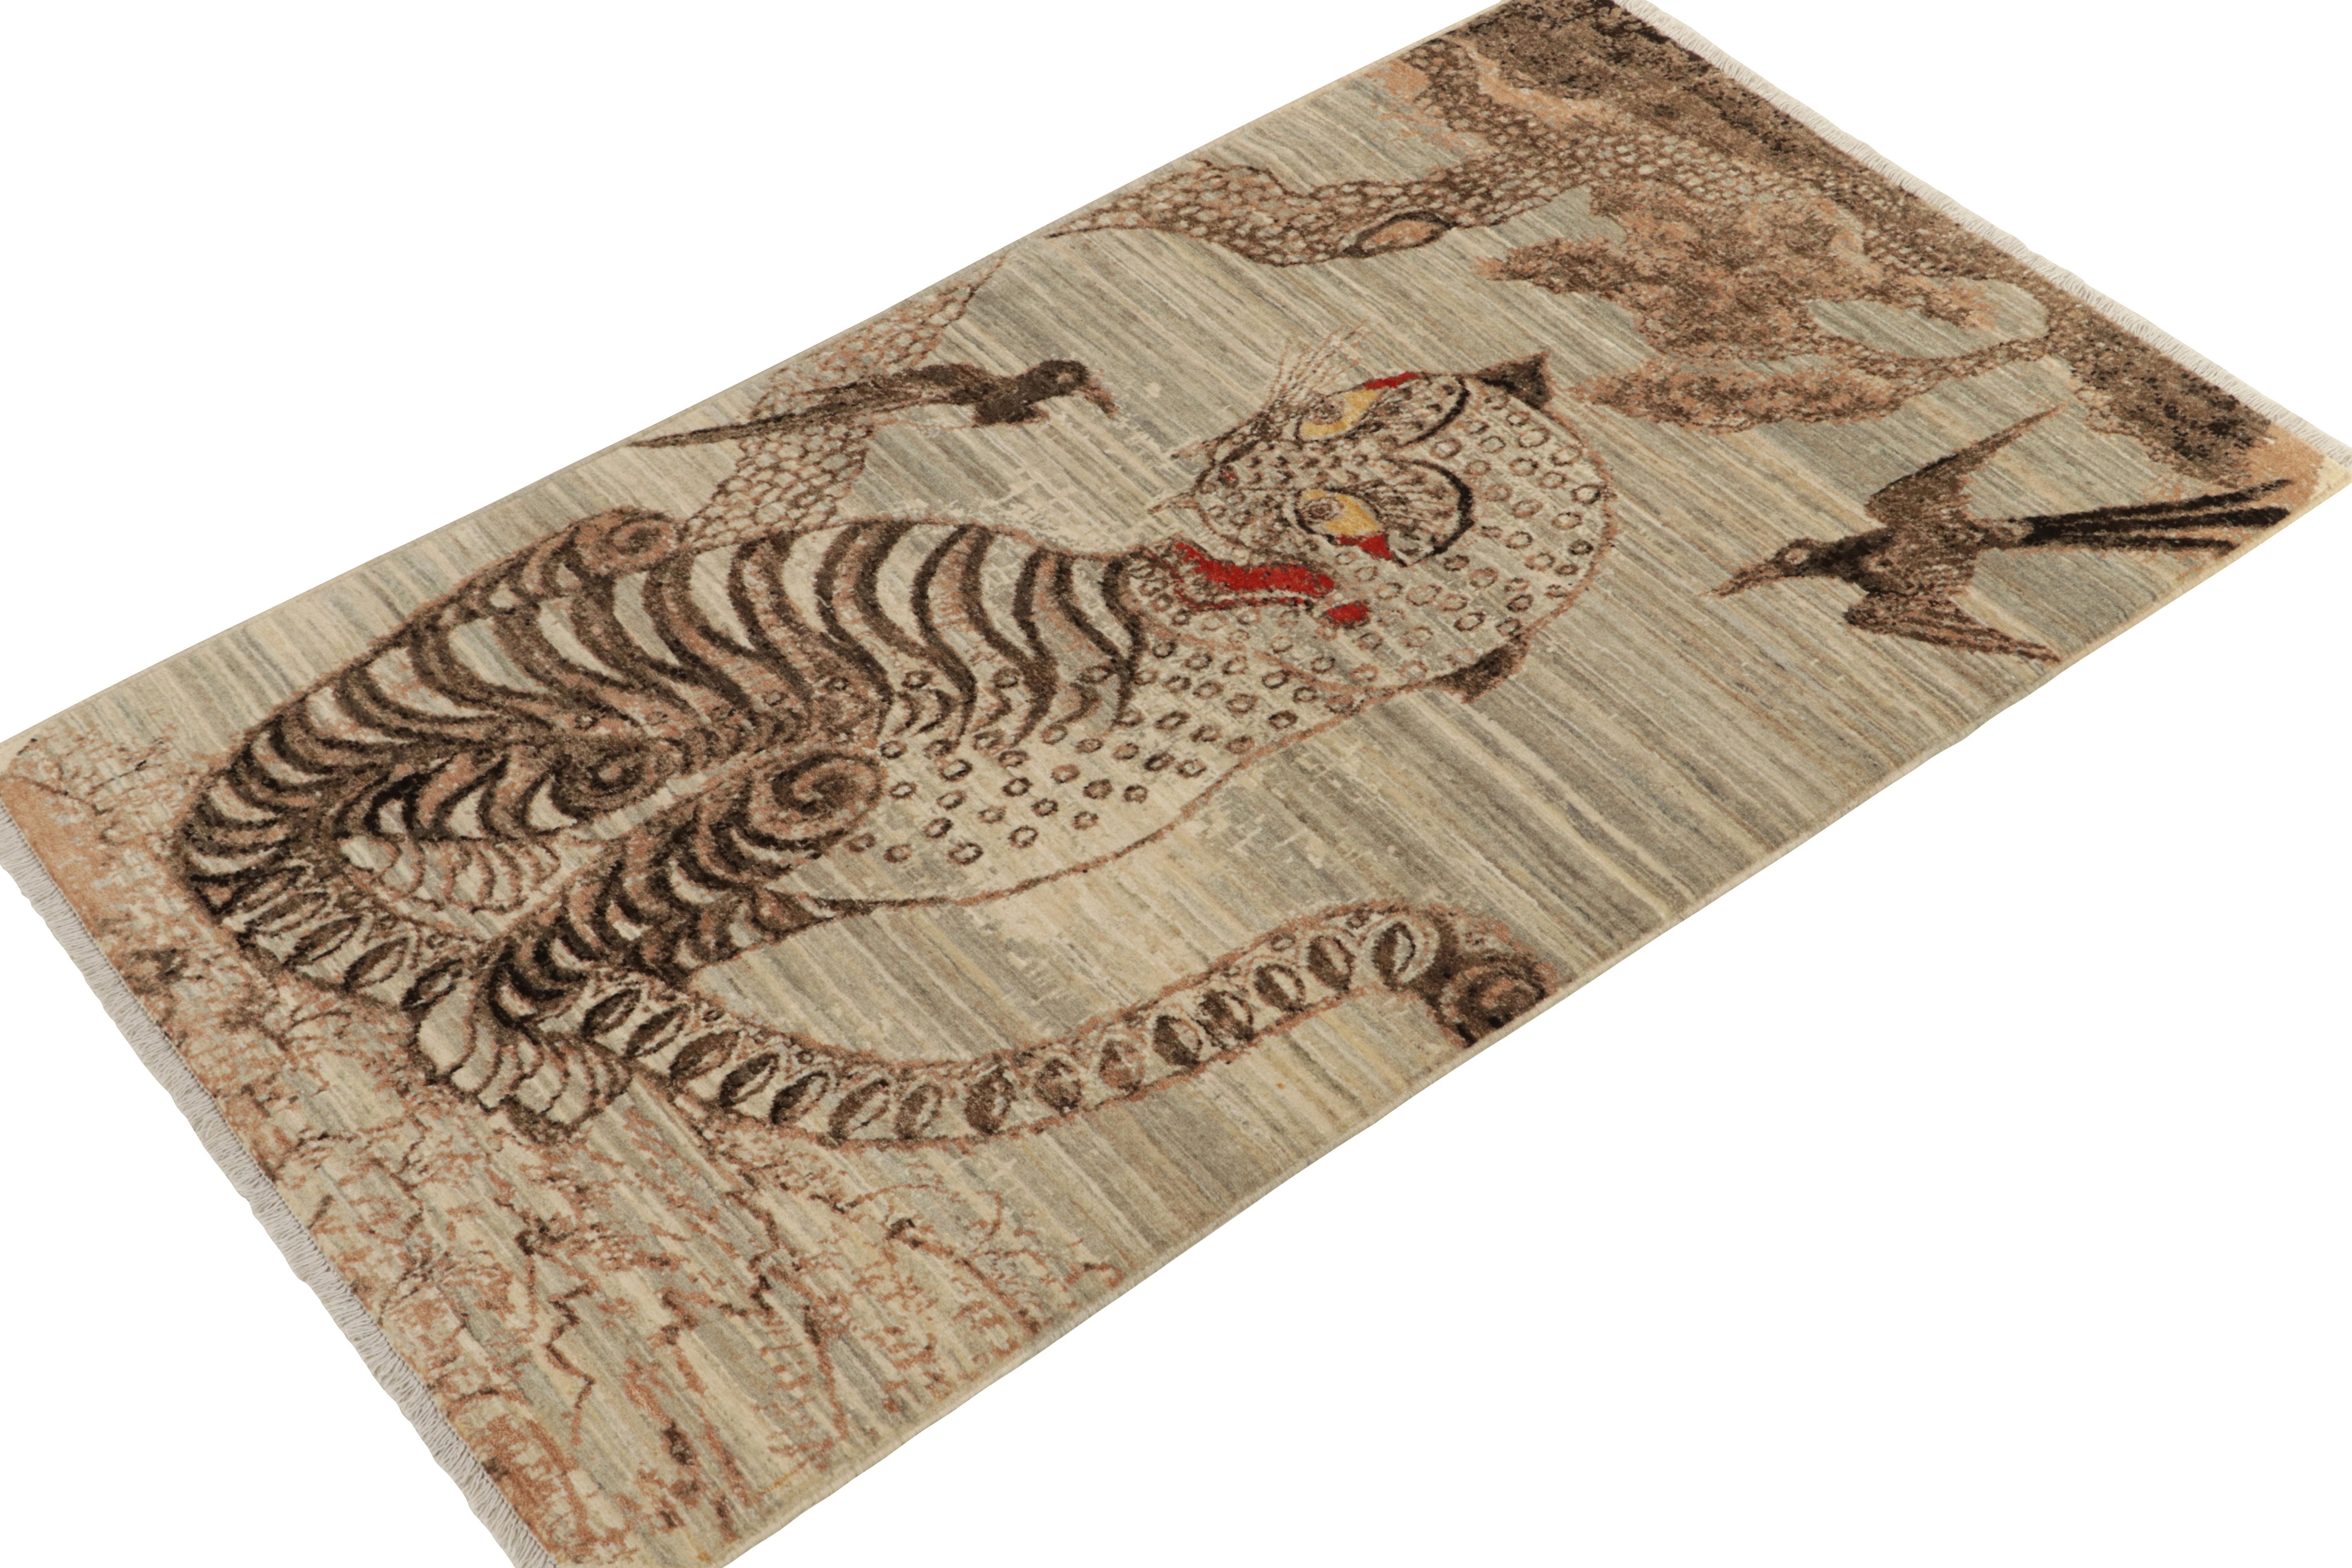 Hand knotted in wool, Rug & Kilim presents this 3x5 piece from its exclusive Tiger line. An exemplary drawing with pictorial representation enjoying a subtle pelt pattern in striaed beige-brown and gray with kisses of red and gold for a bold, yet